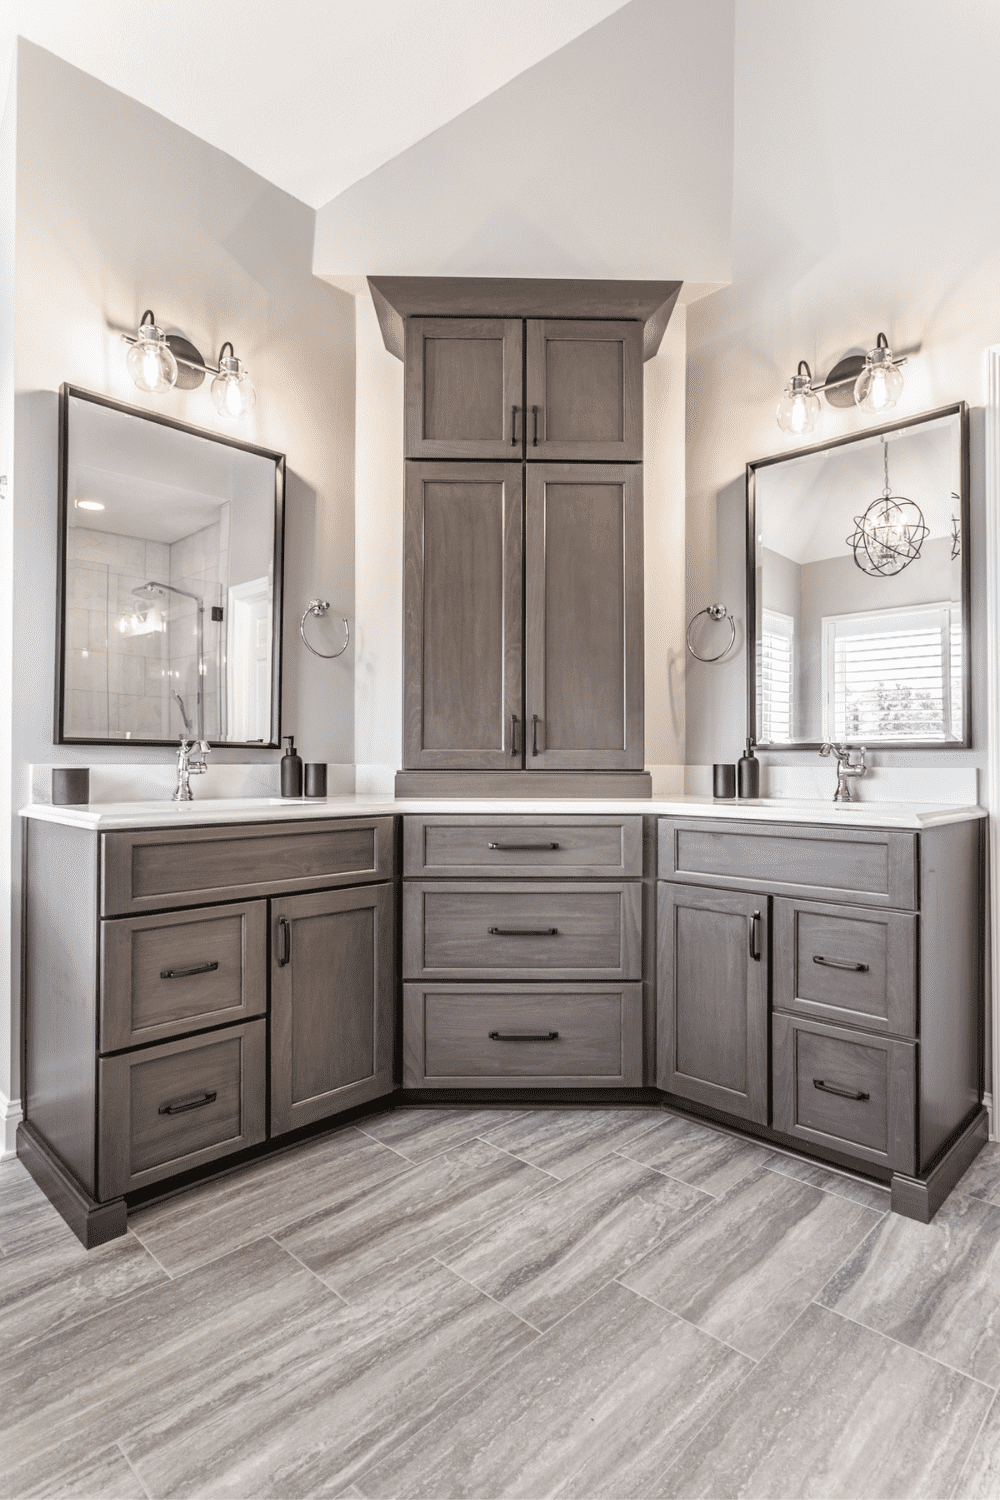 Nicholas Design Build | A master bath remodel featuring two sinks and a large mirror.